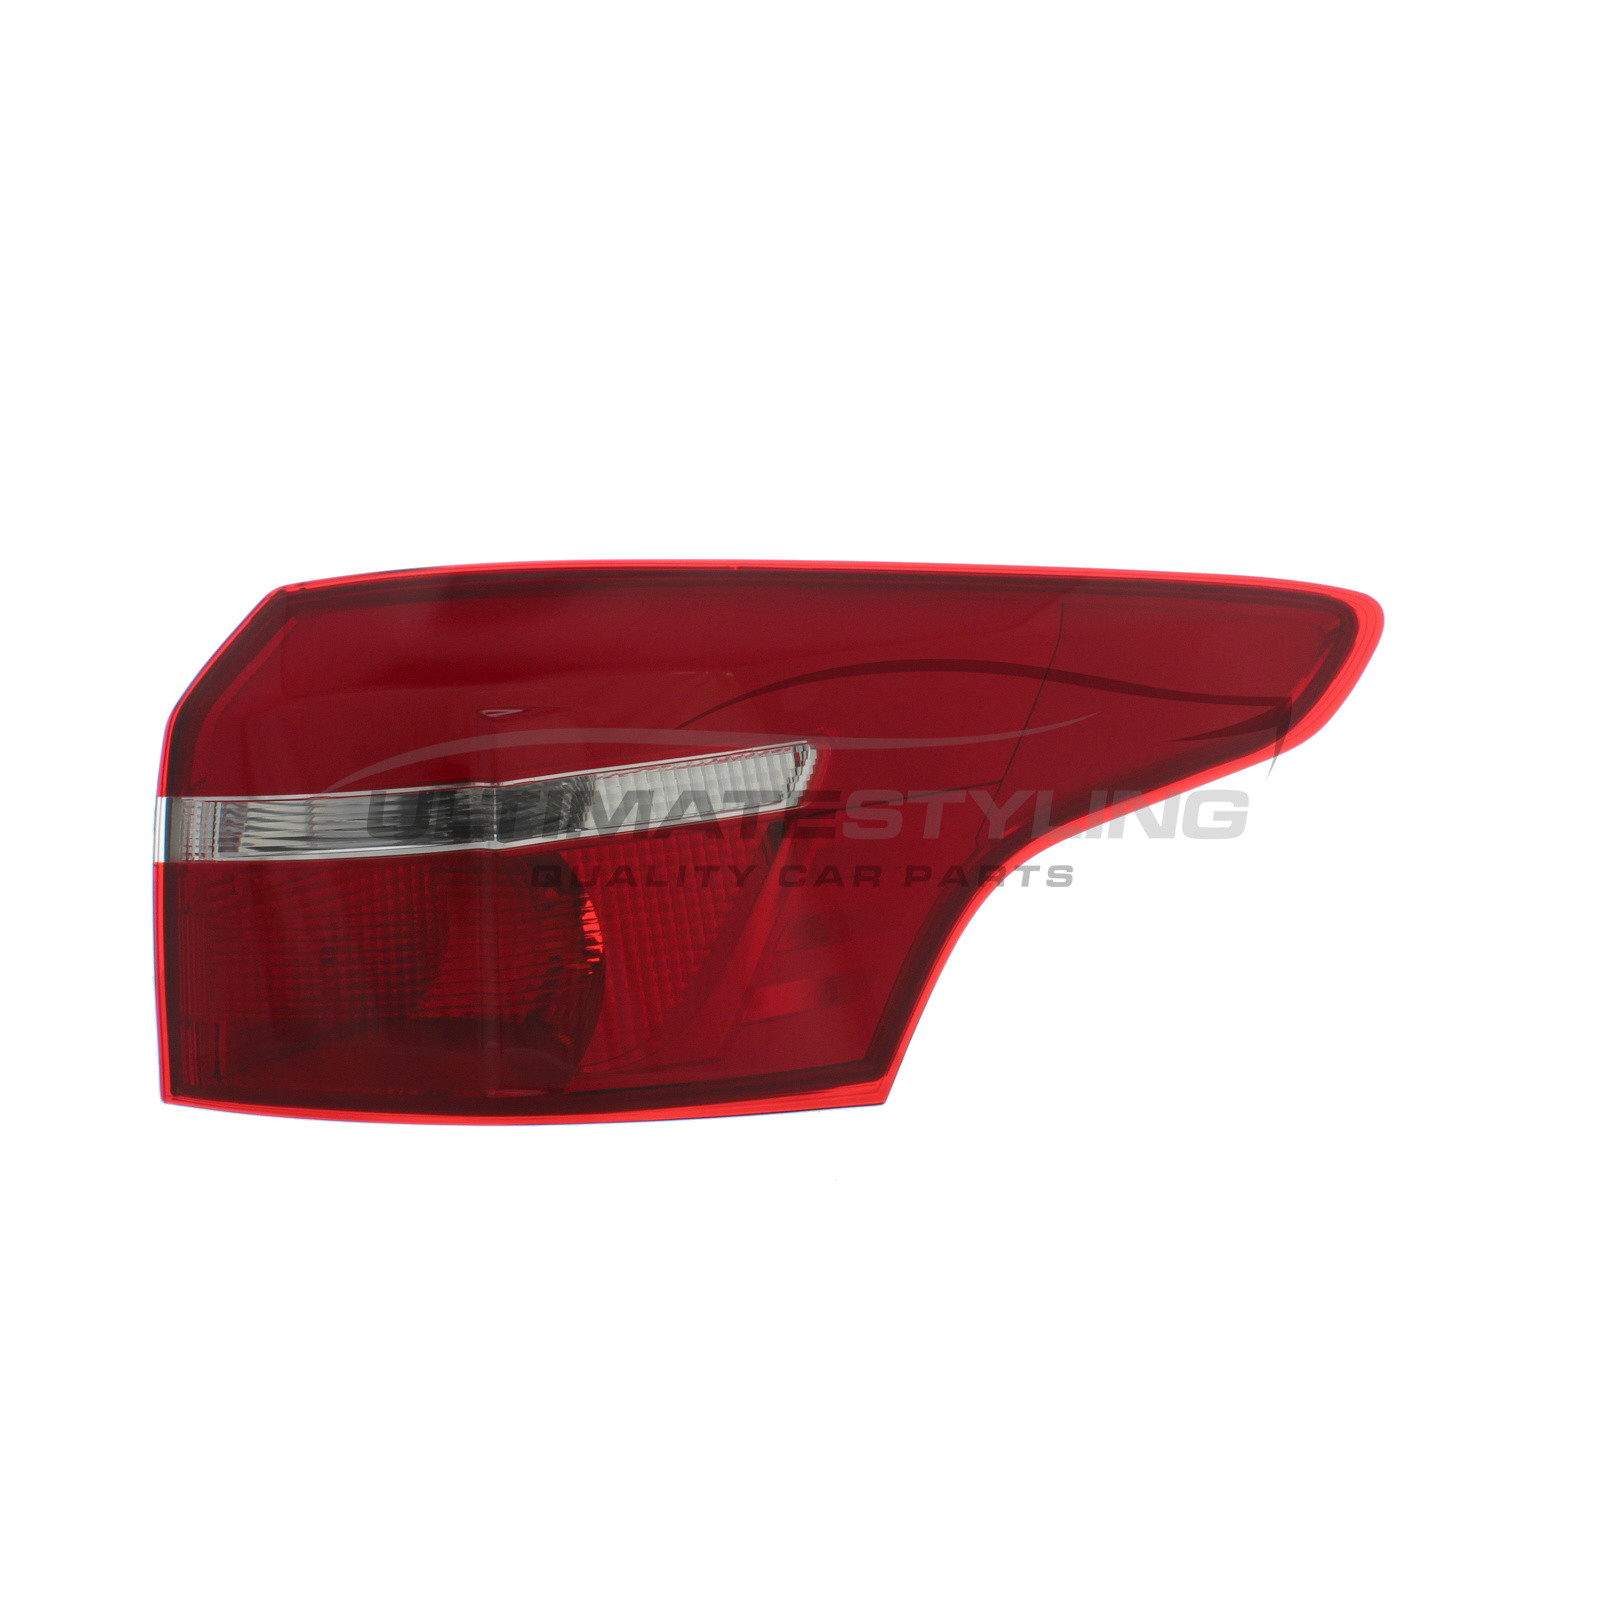 Ford Focus 2014-2018 Non-LED Outer (Wing) Rear Light / Tail Light Excluding Bulb Holder Drivers Side (RH)